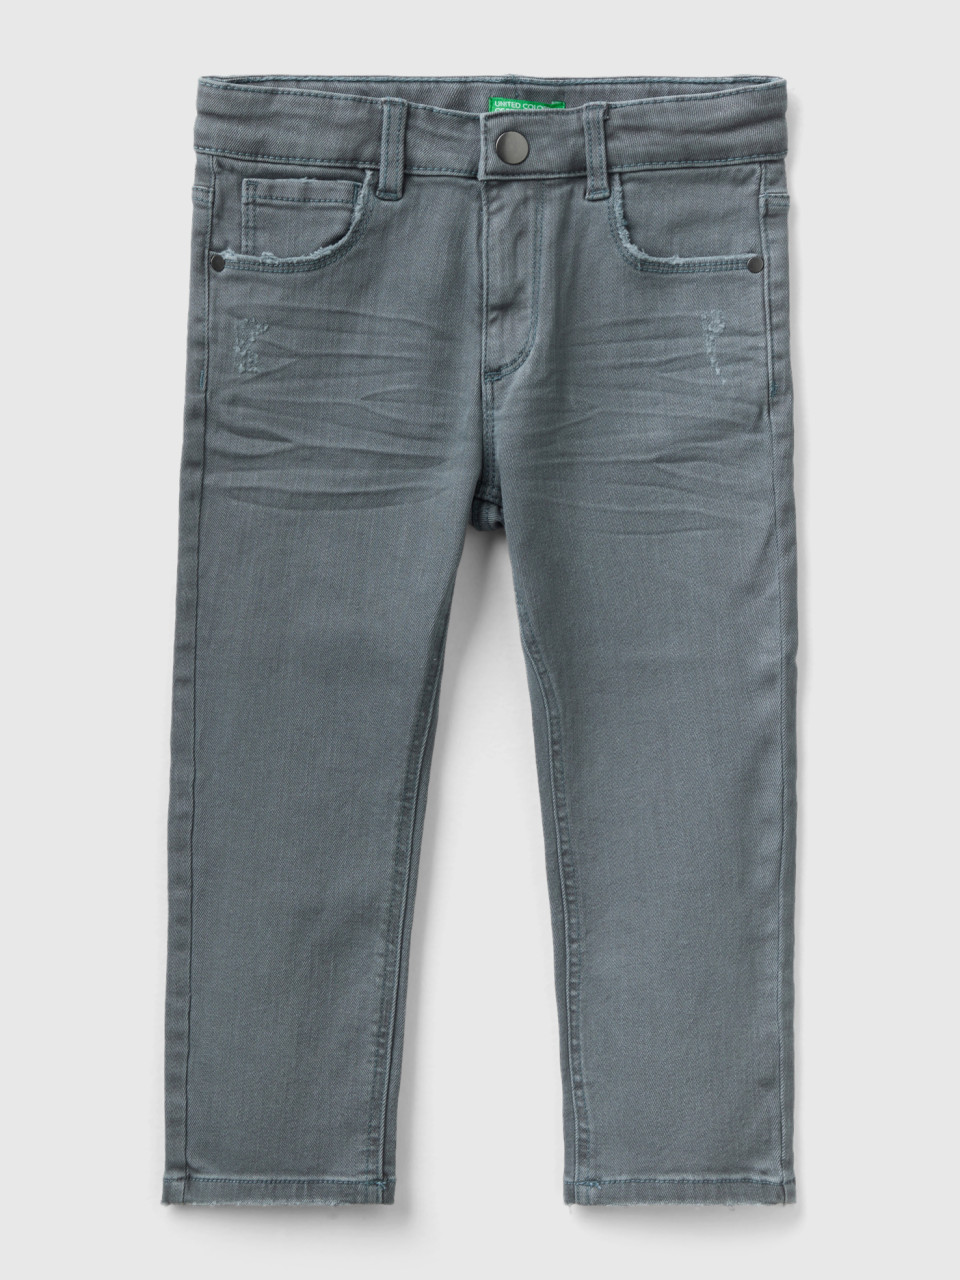 Benetton, Jeans With Small Rips, Dark Gray, Kids